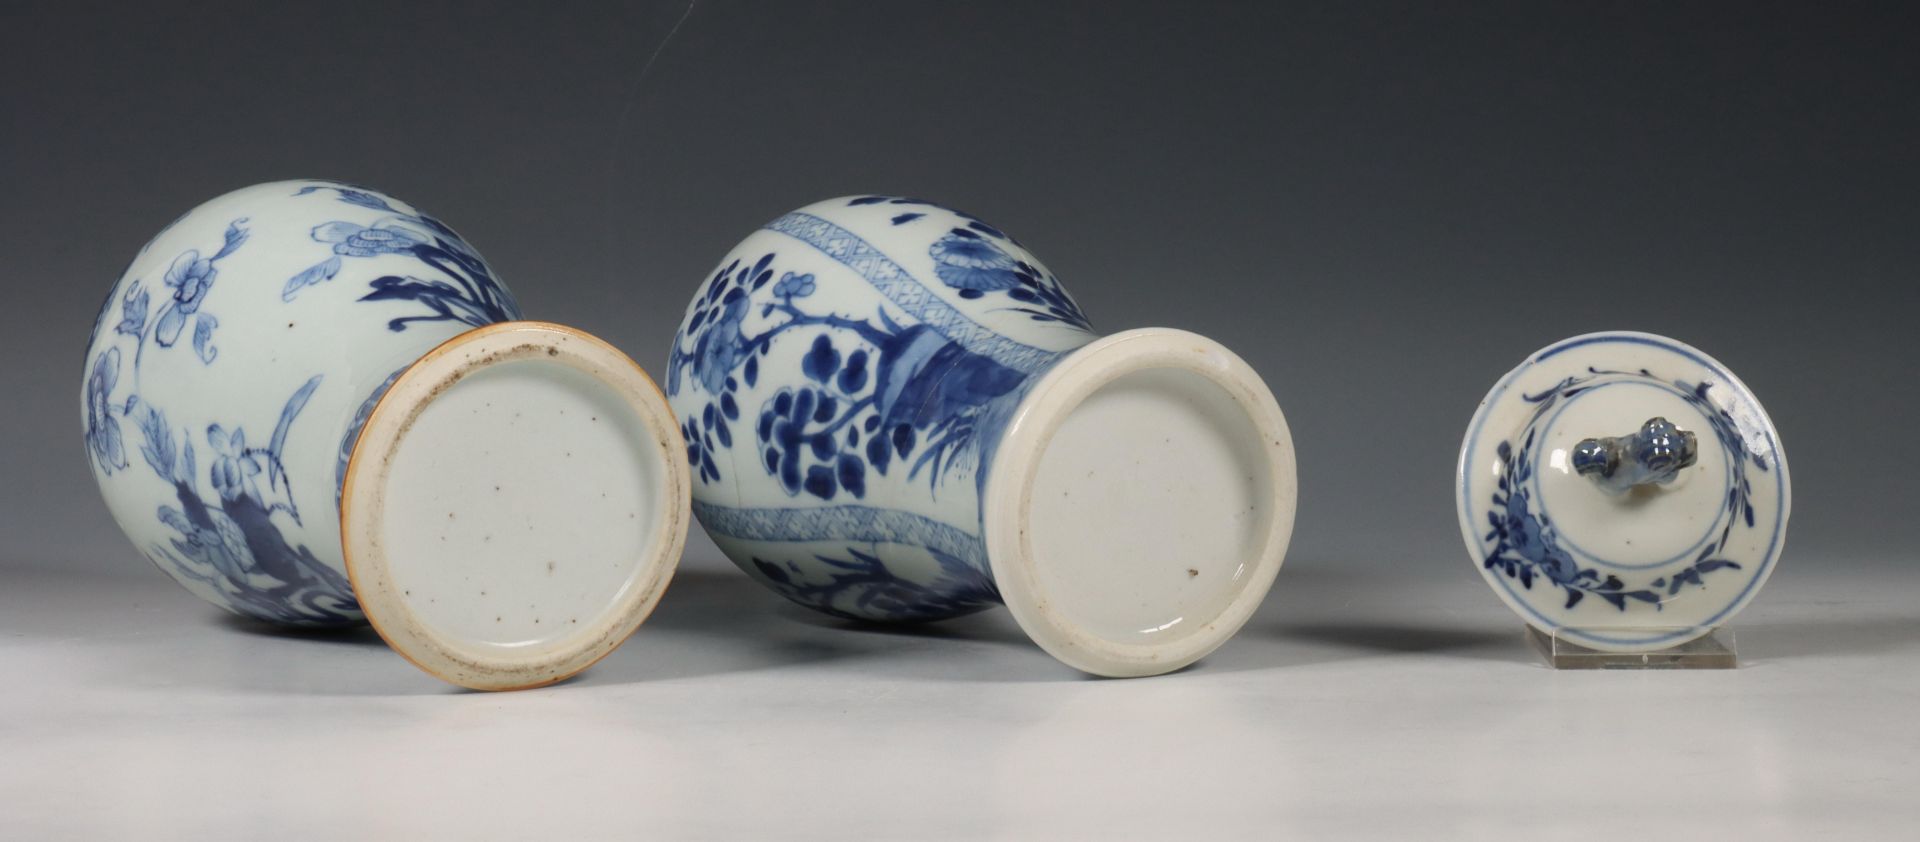 China, two blue and white porcelain baluster vases, Qianlong period (1736-1795), - Image 5 of 6